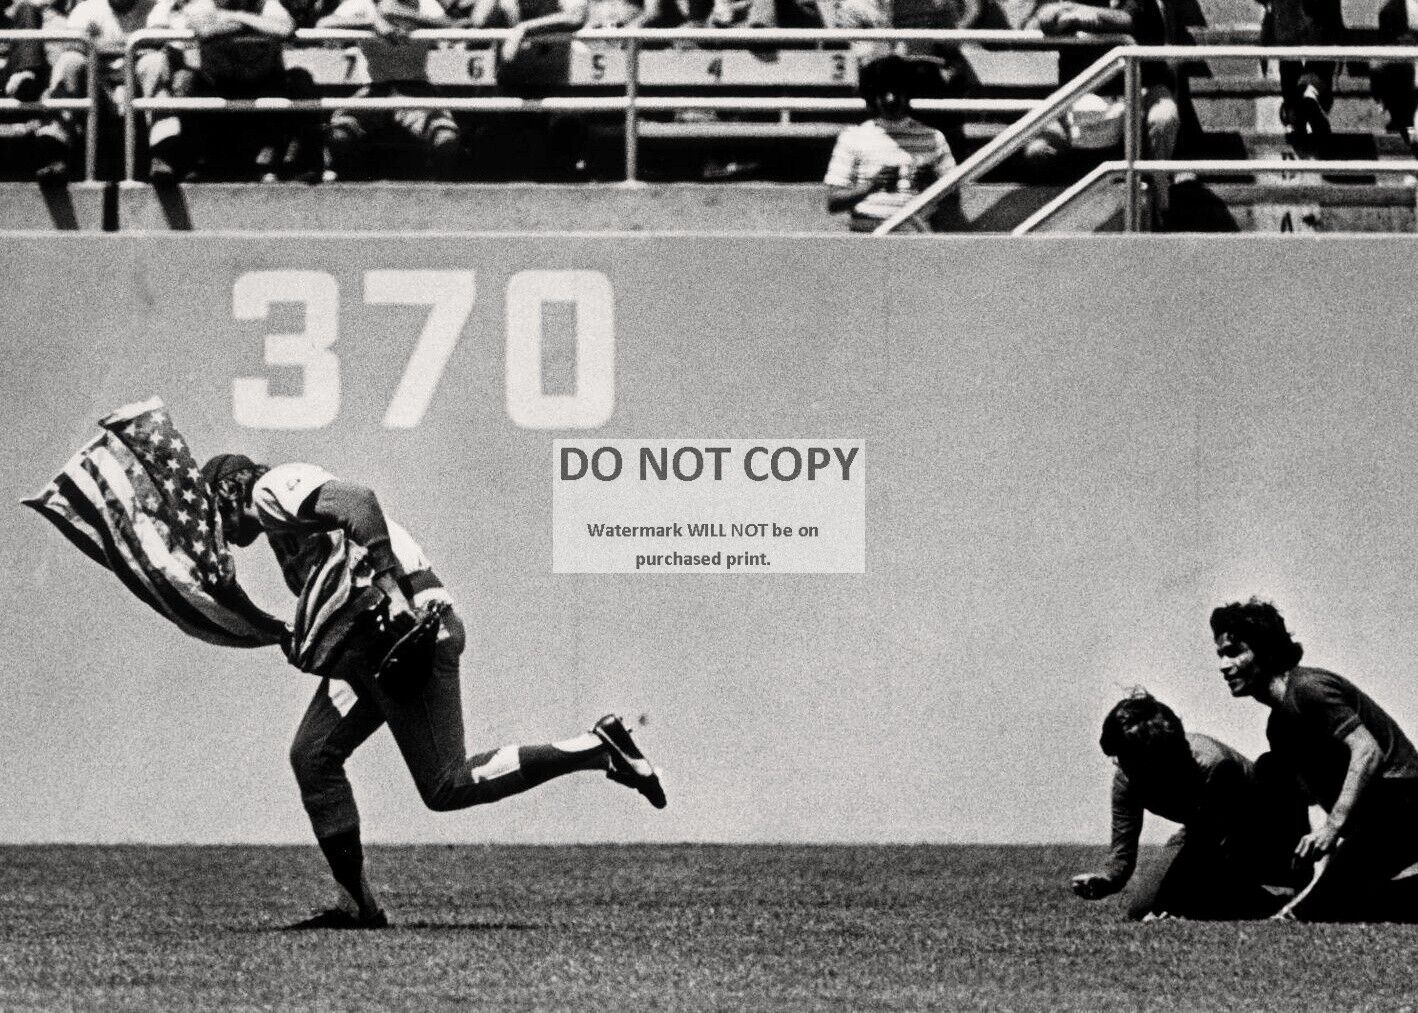 *5X7* PHOTO RICK MONDAY CUBS OUTFIELDER SAVES THE FLAG @ DODGER STADIUM (EP-900)